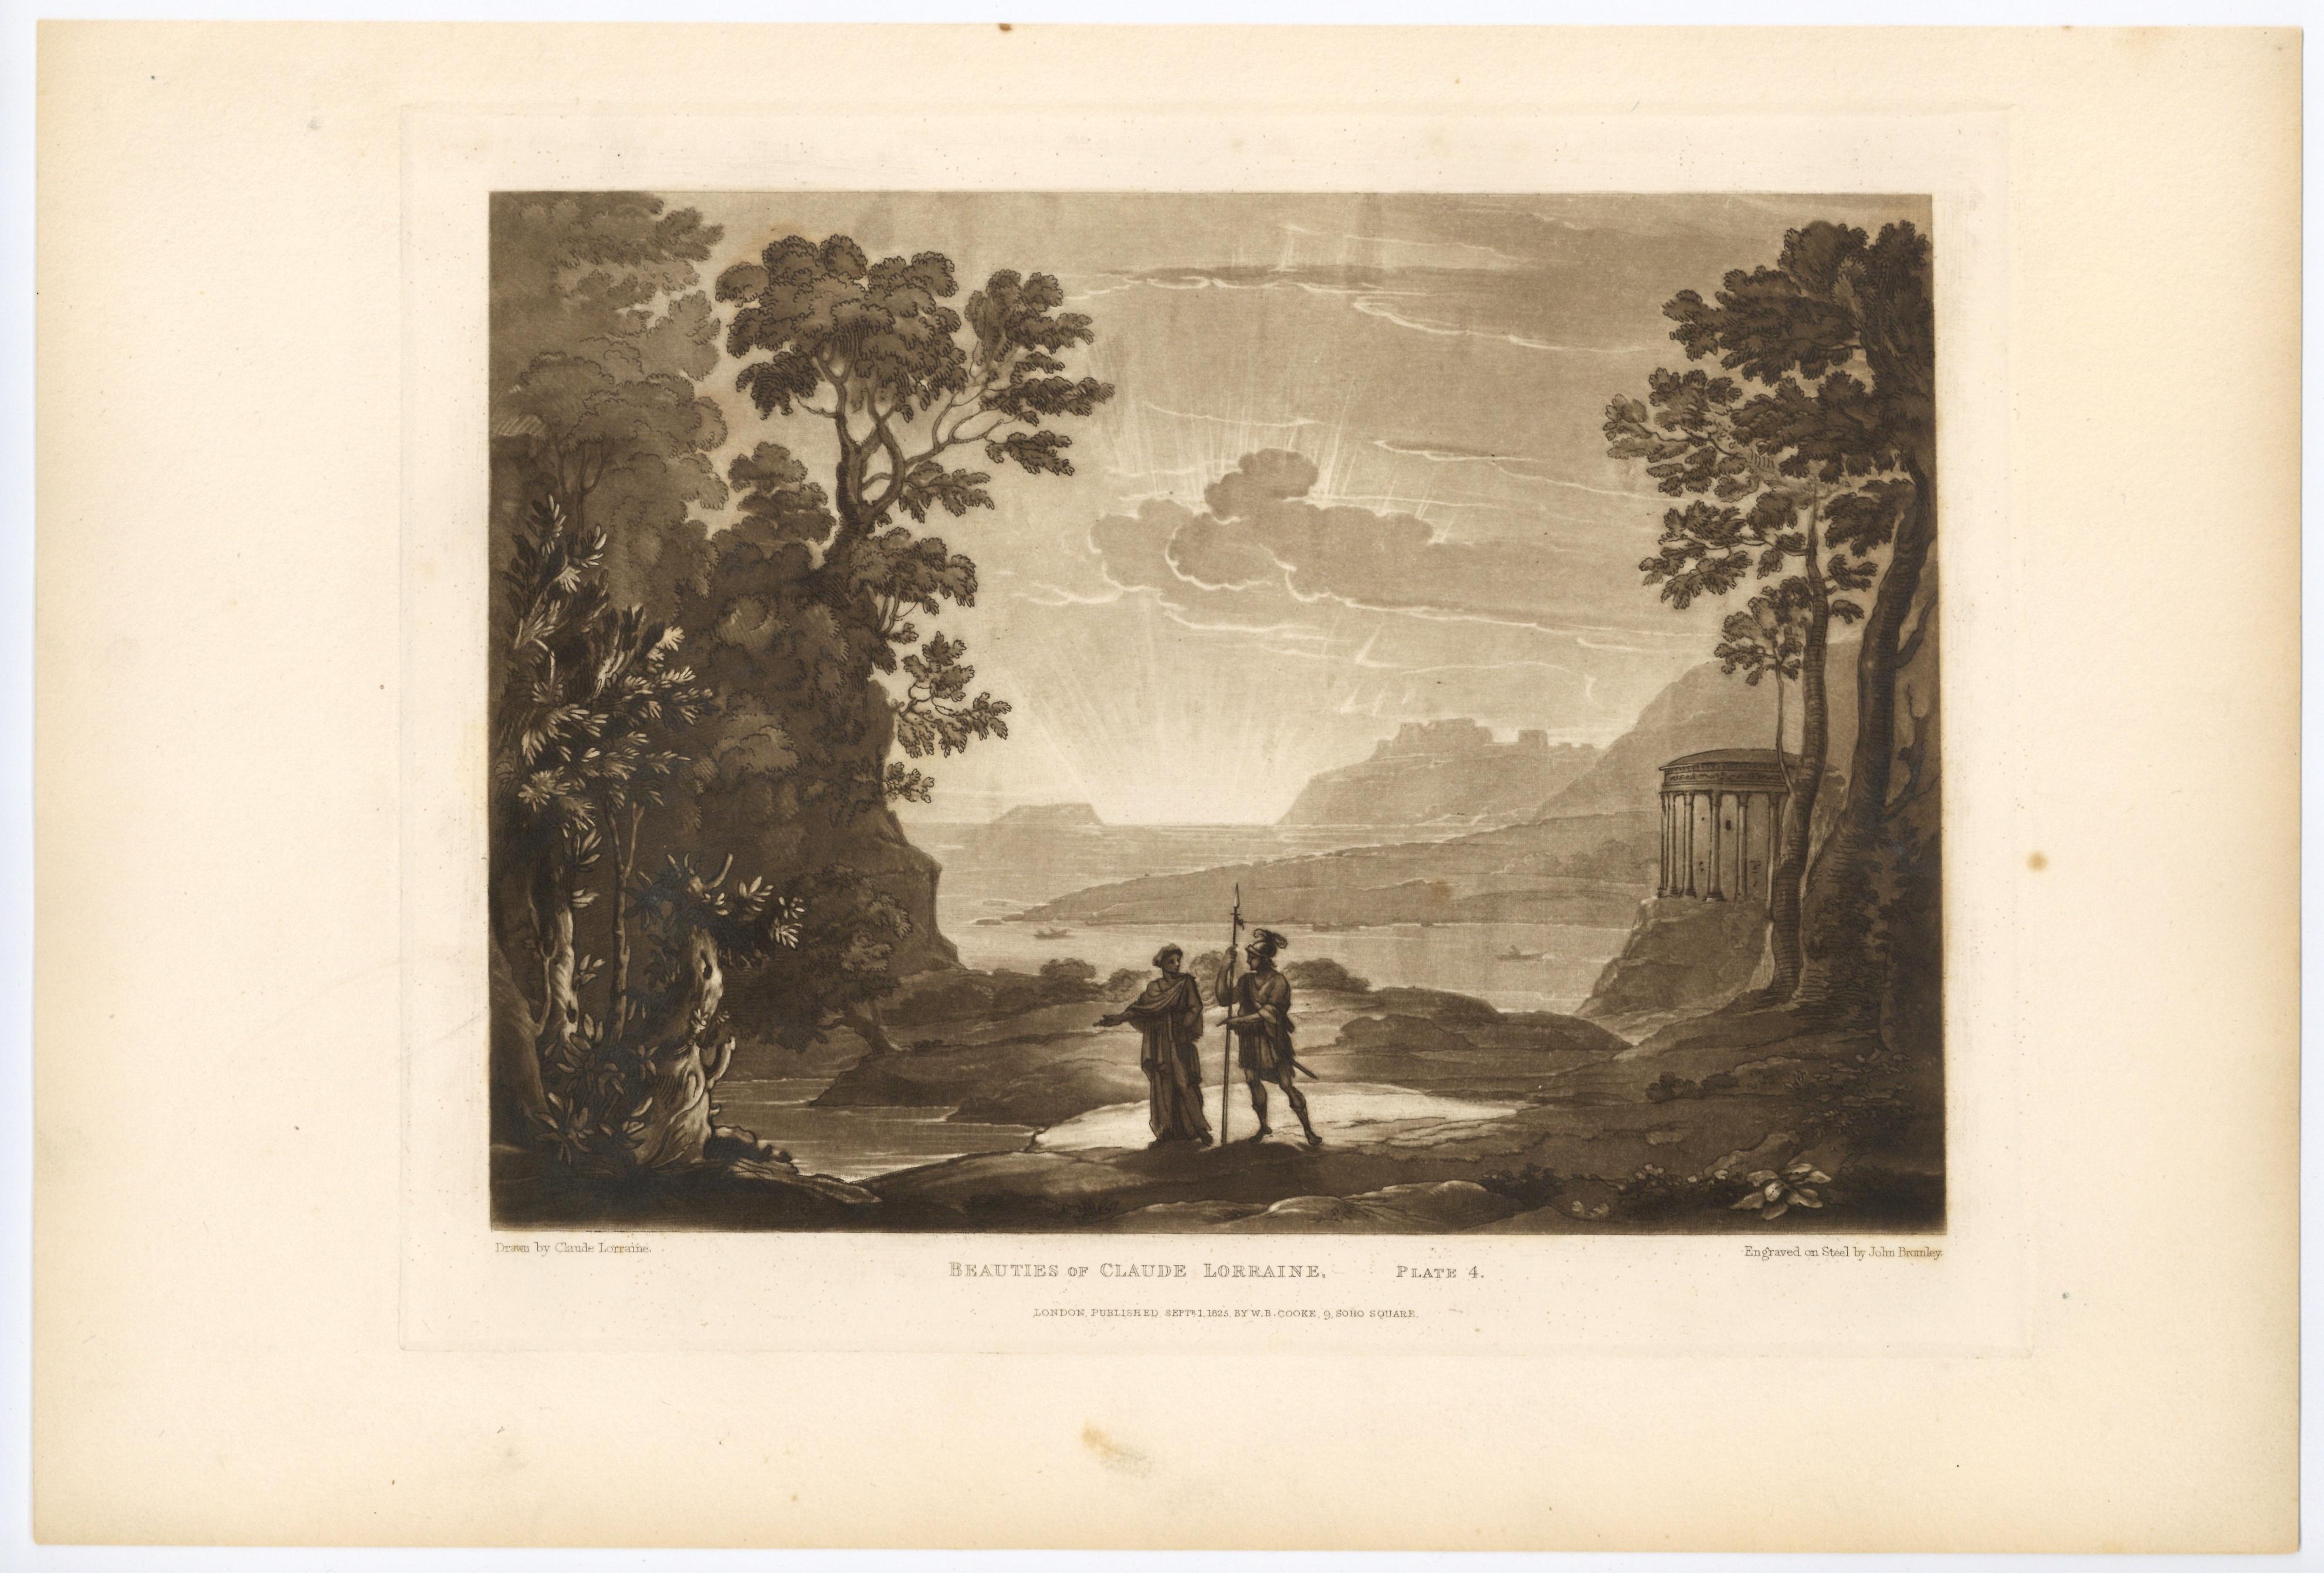 Medium: etching, engraving and mezzotint (after Claude Lorrain). This lovely impression on wove paper was engraved by G.H. Every for the 